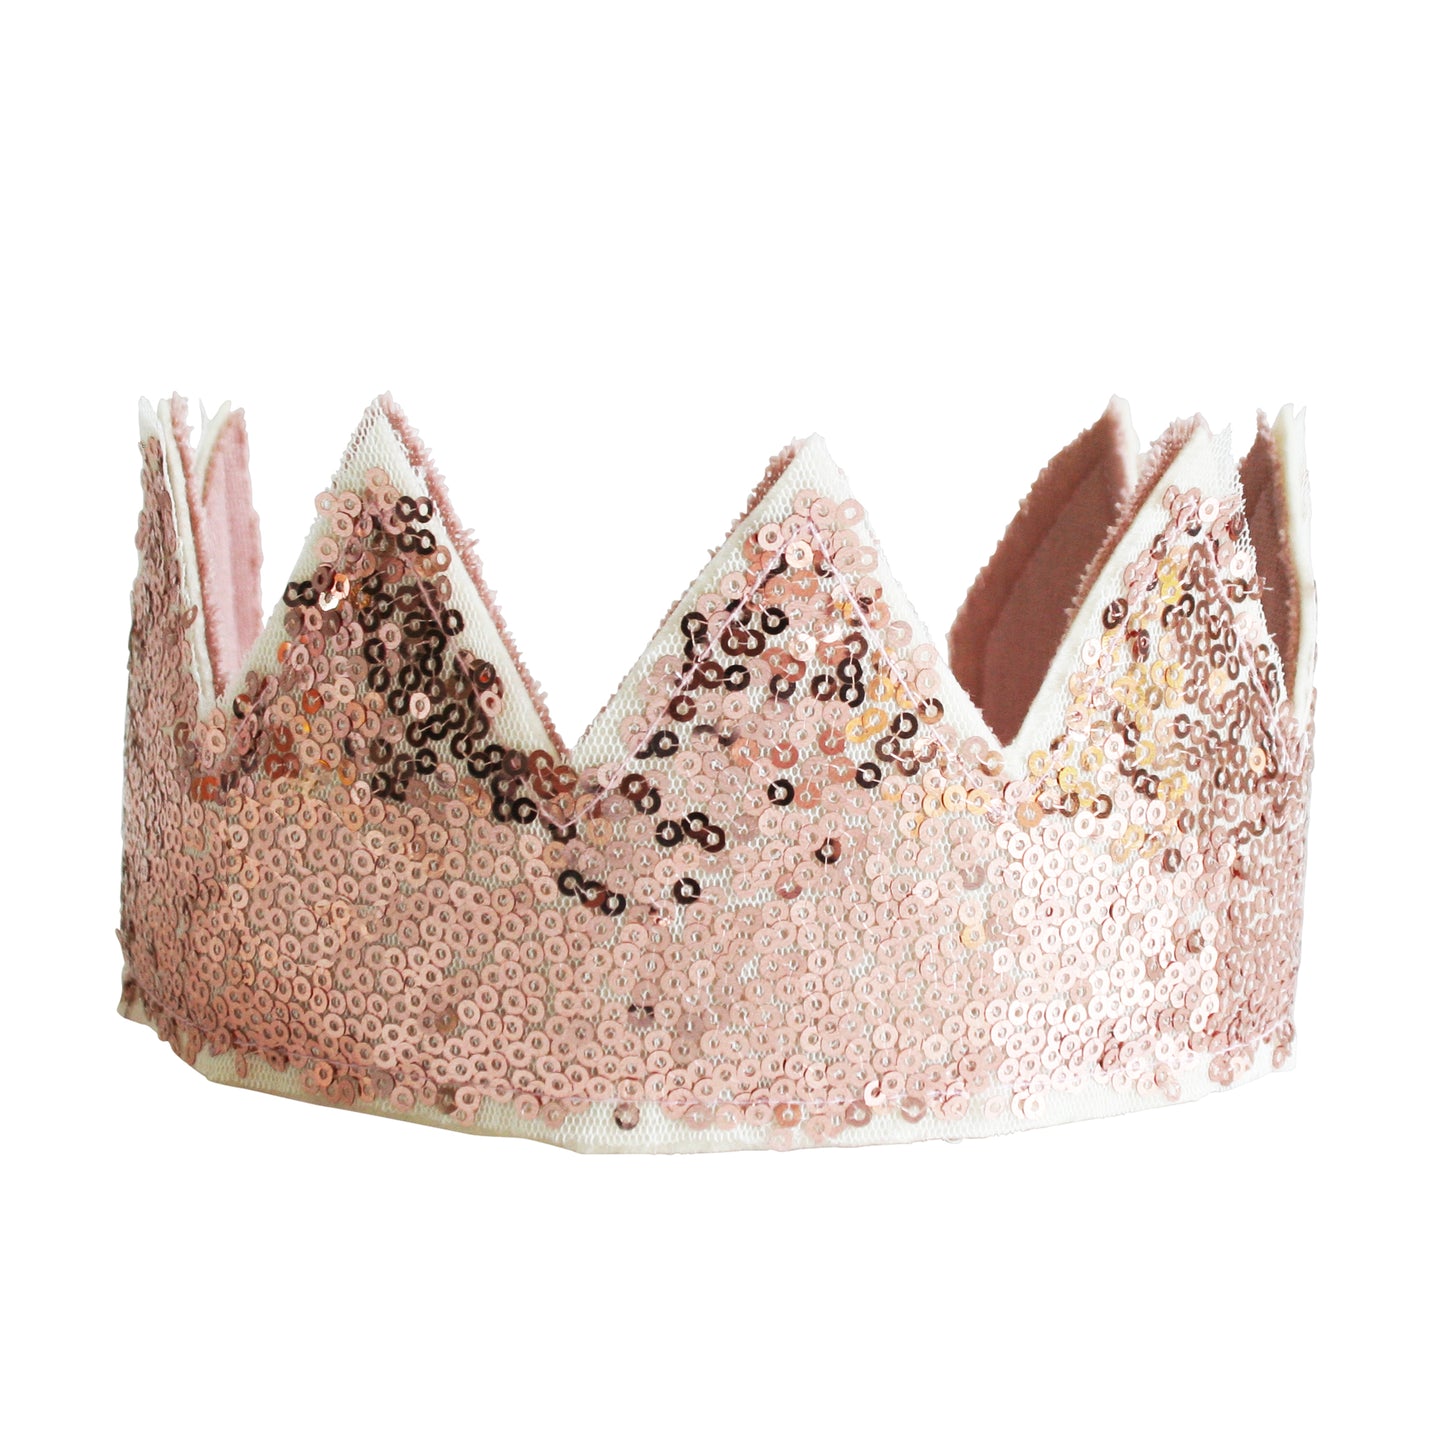 A little sparkle goes a long way with this gorgeous rose sequin crown. Ribbon closure for adjustable wear. Suitable 18 months - 4 yrs approx.